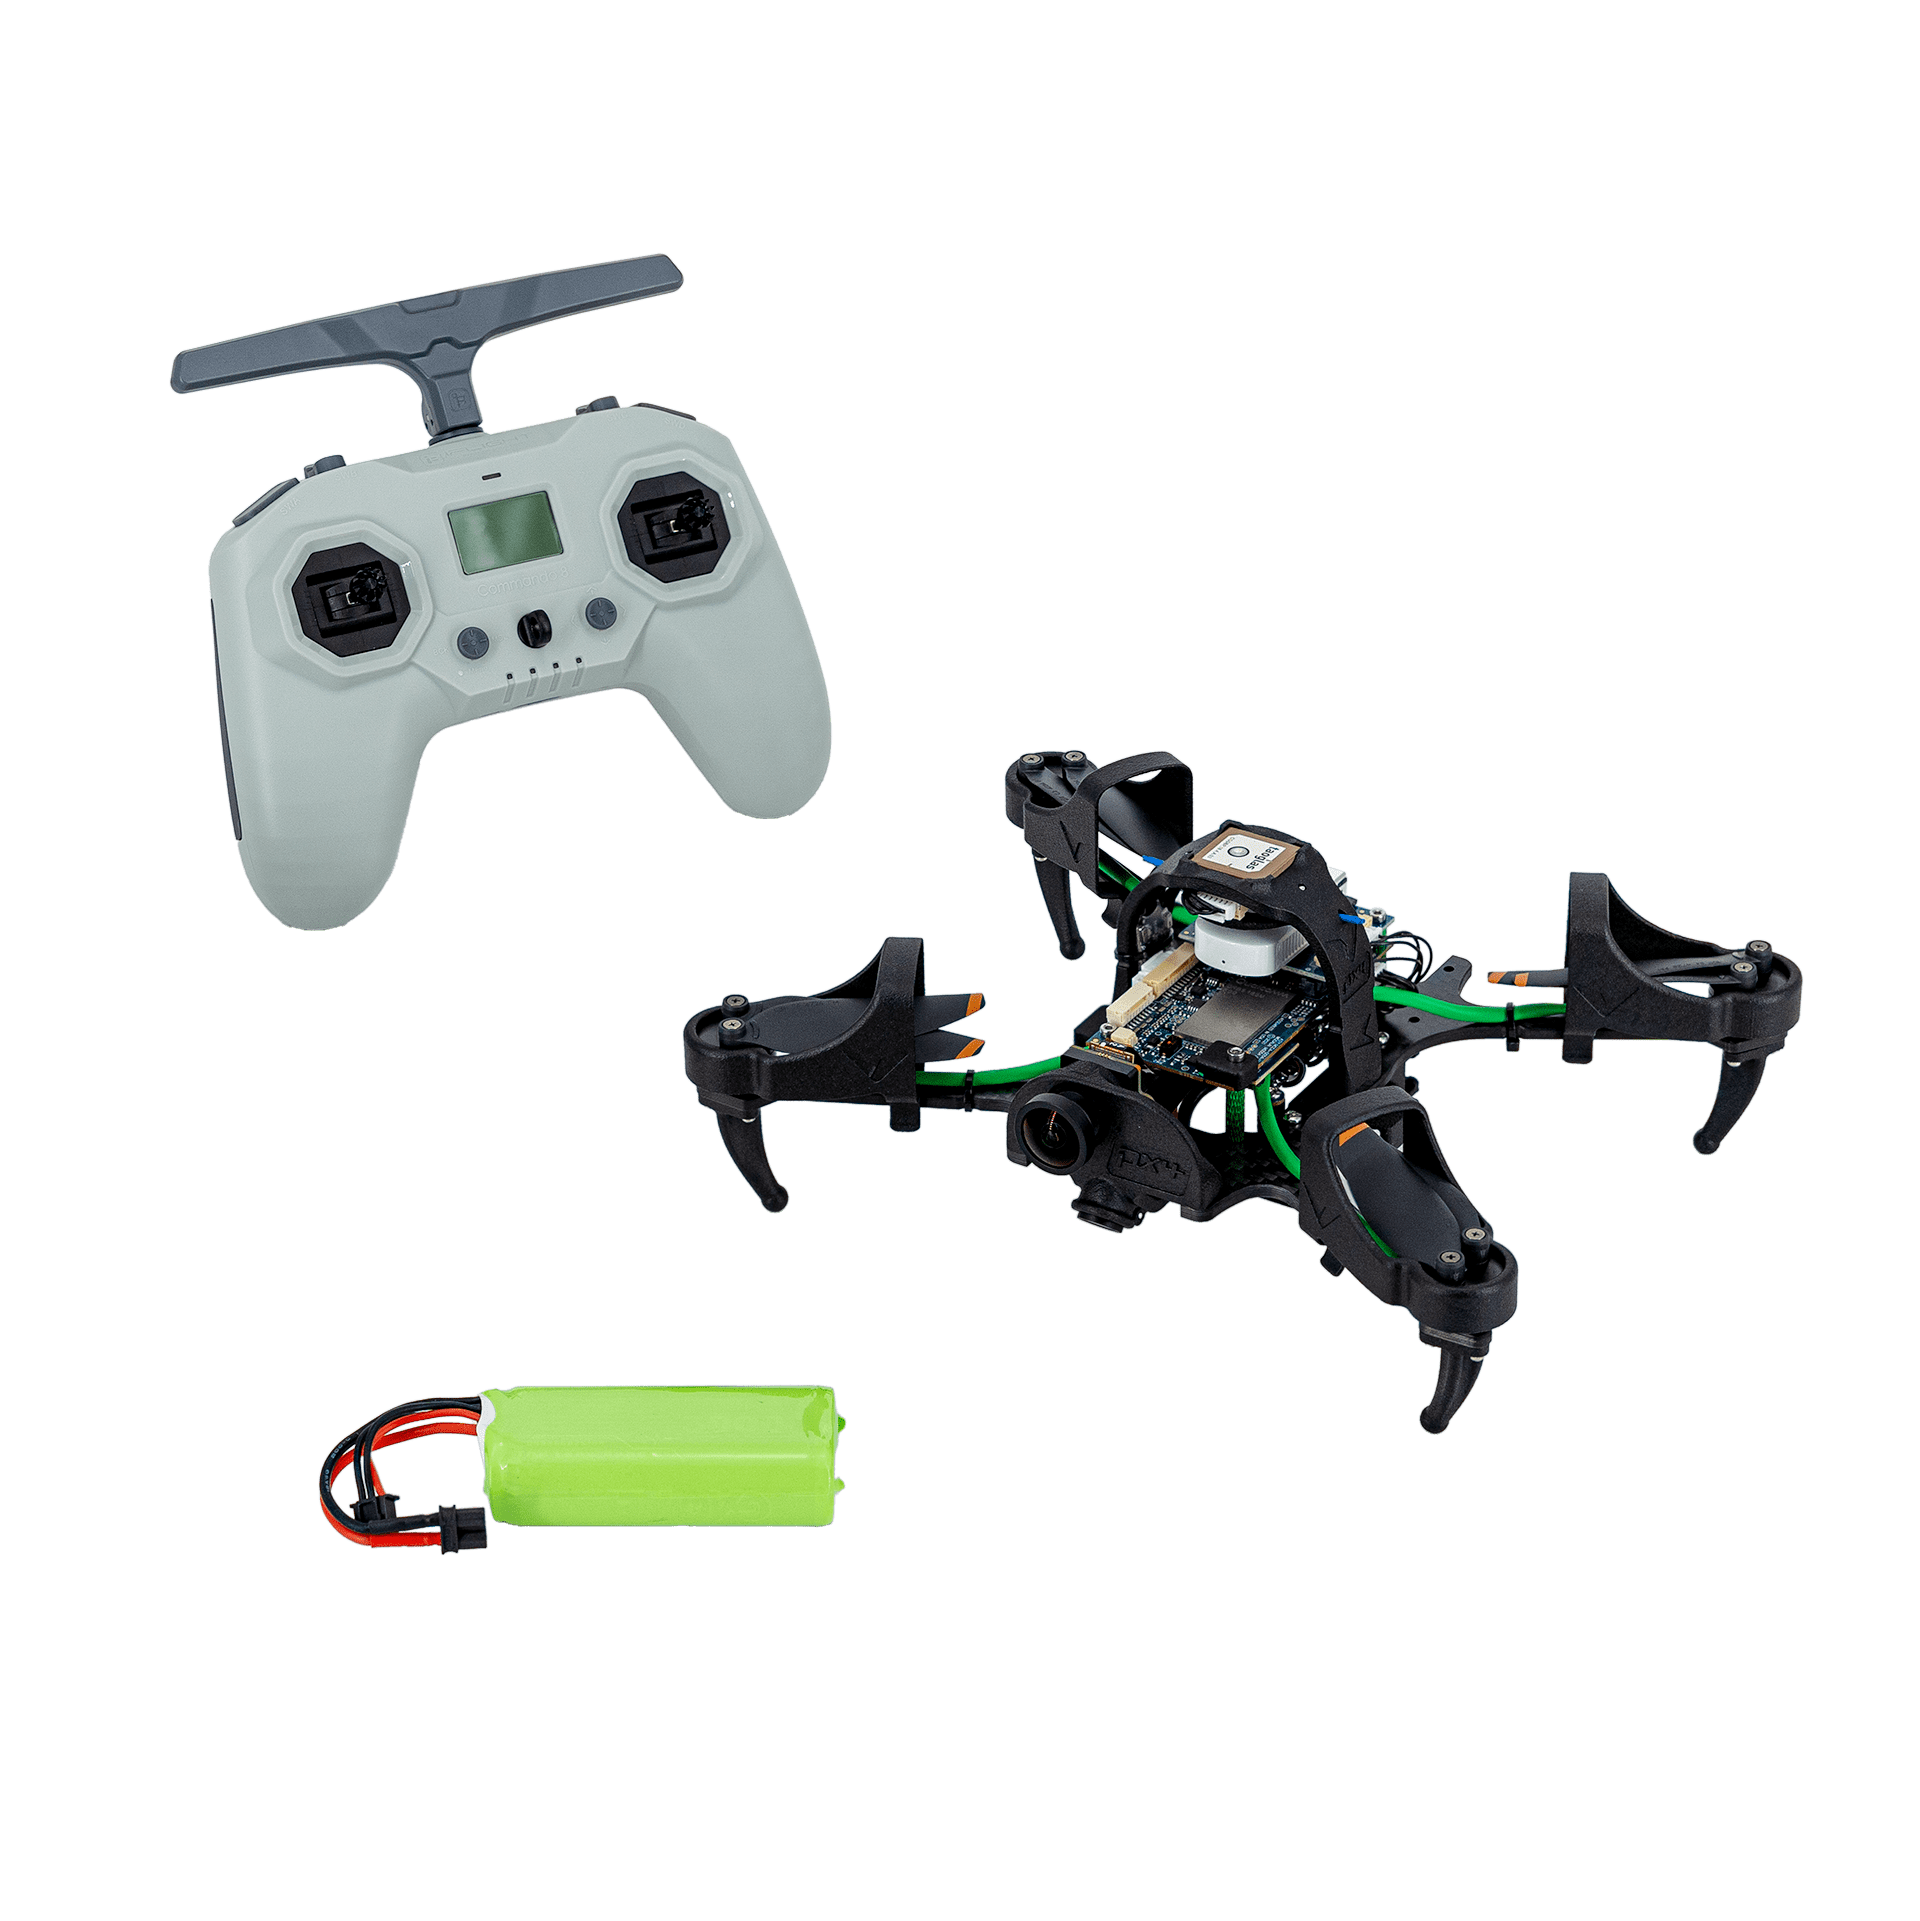 ModalAI, Inc. Drone with Battery and Controller PX4 Autonomy Developer Kit